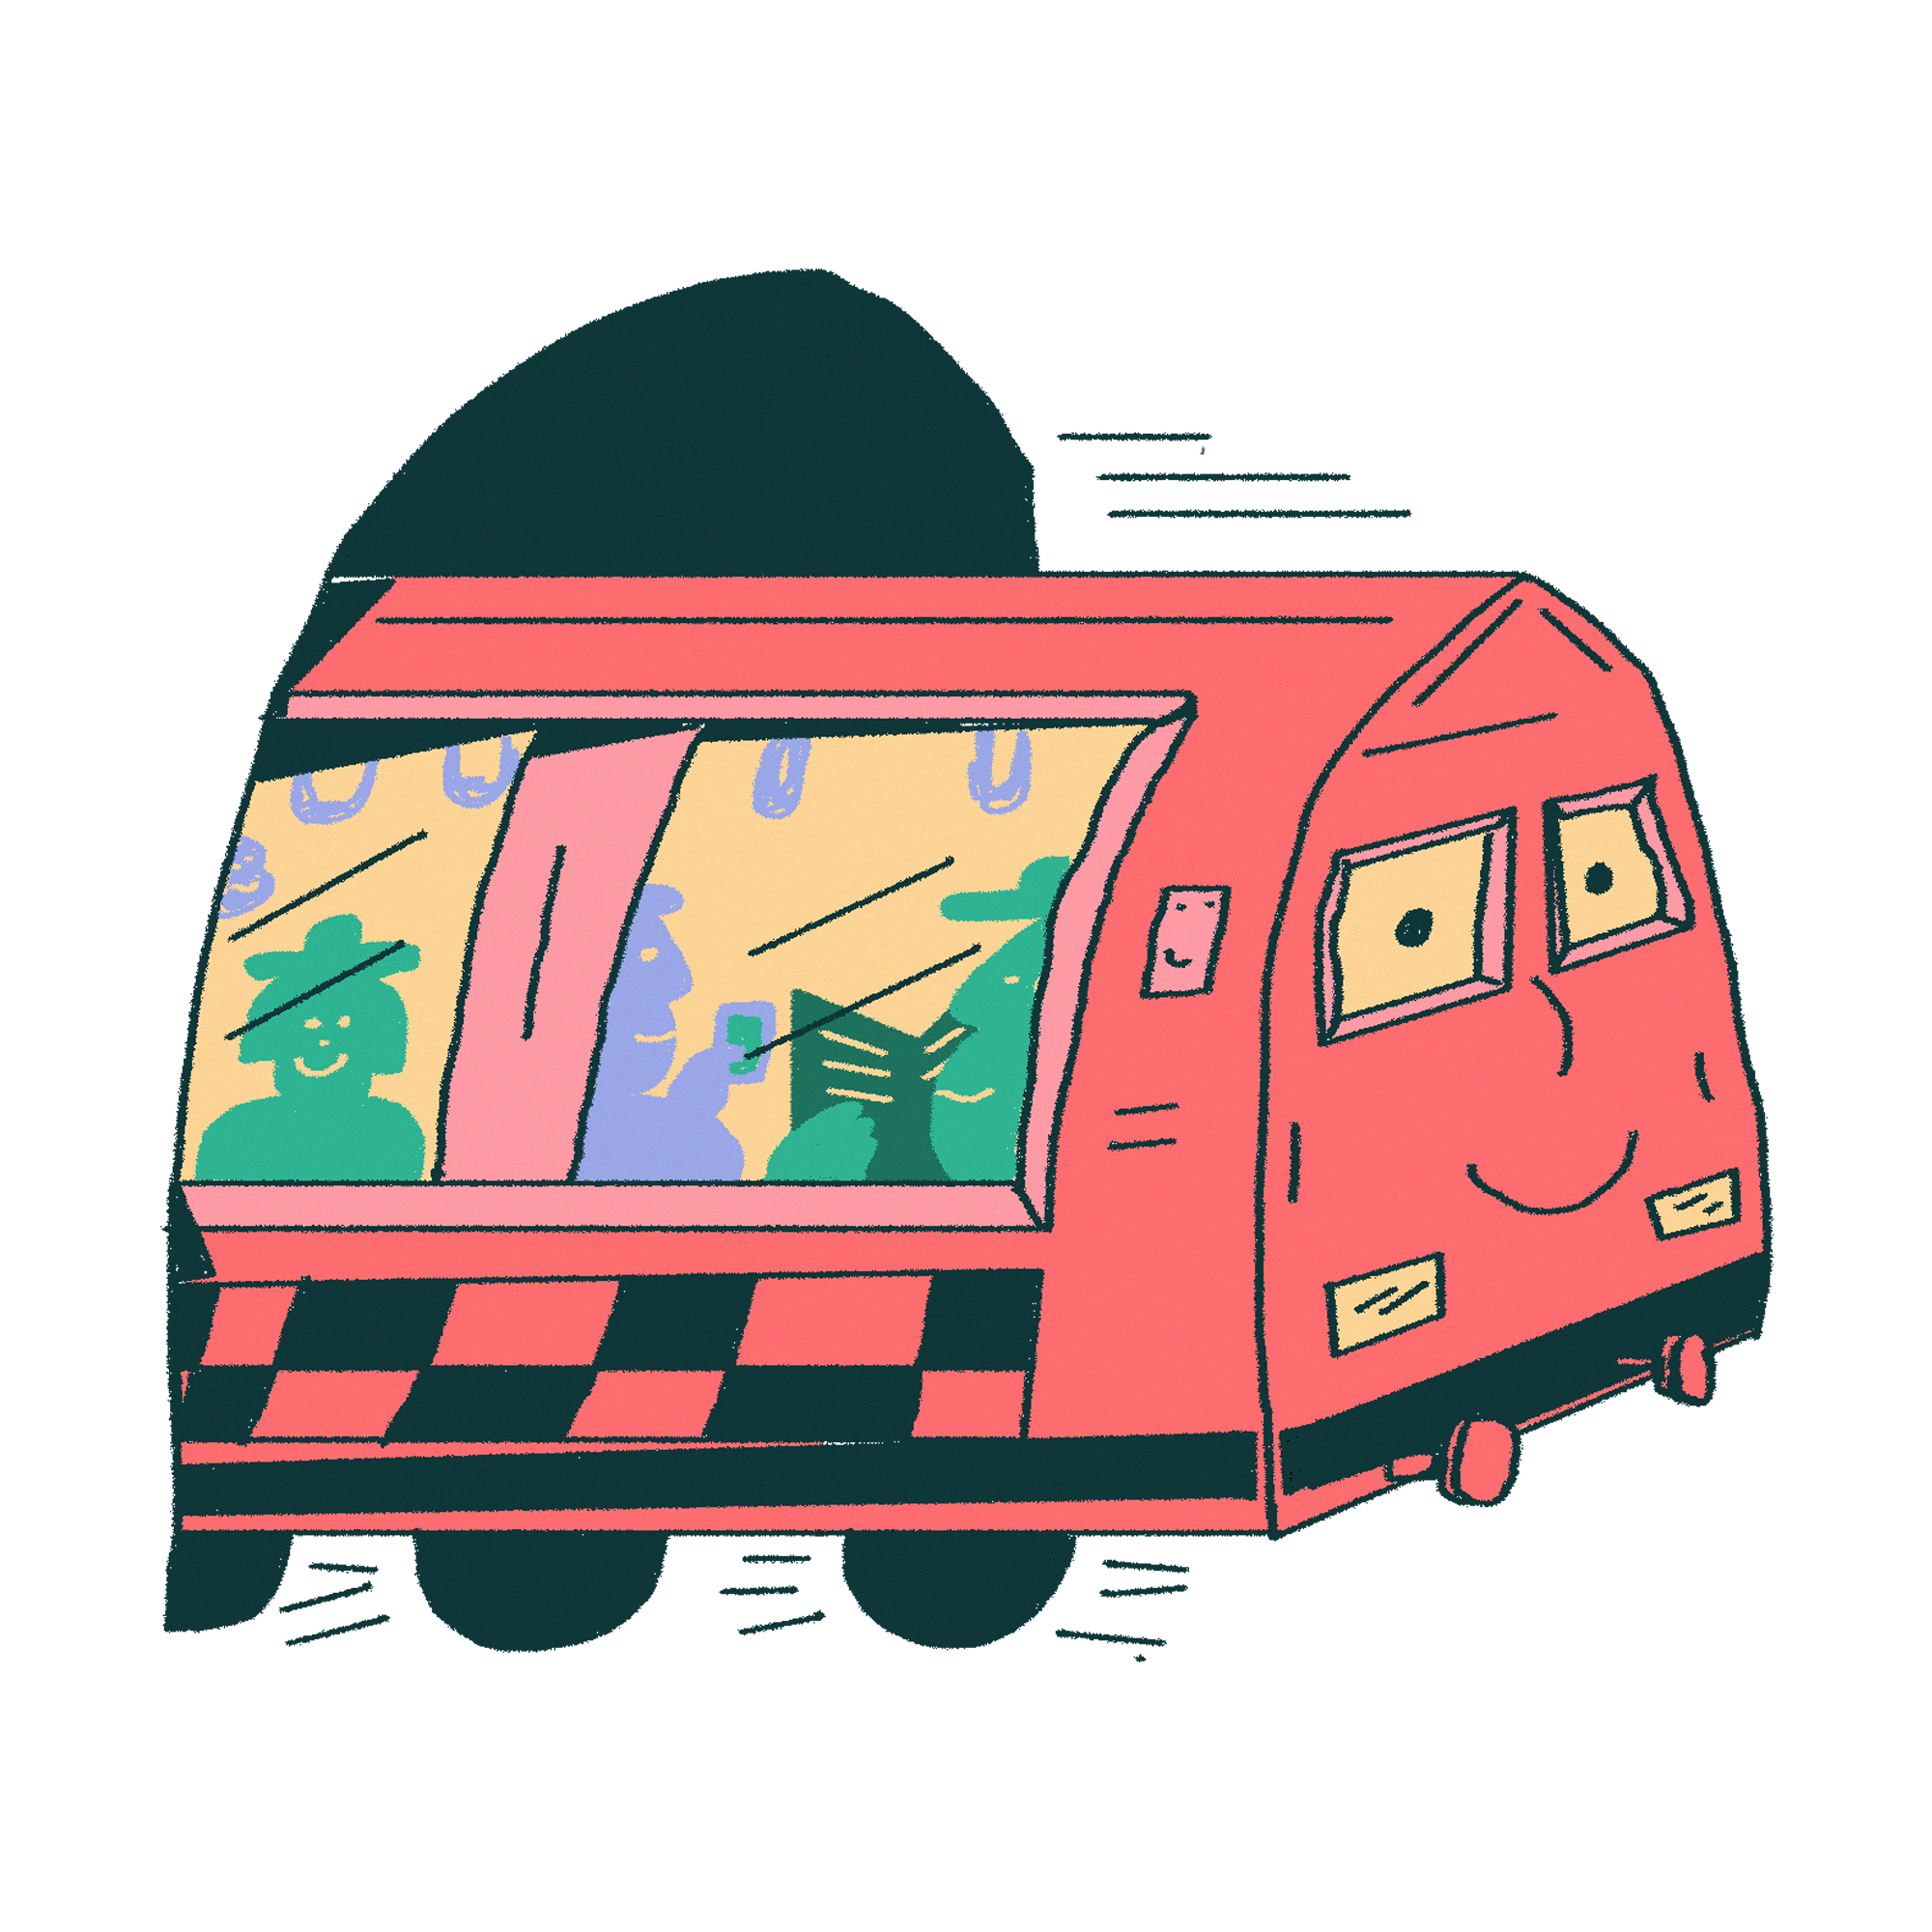 Illustration of a pink, smiling train